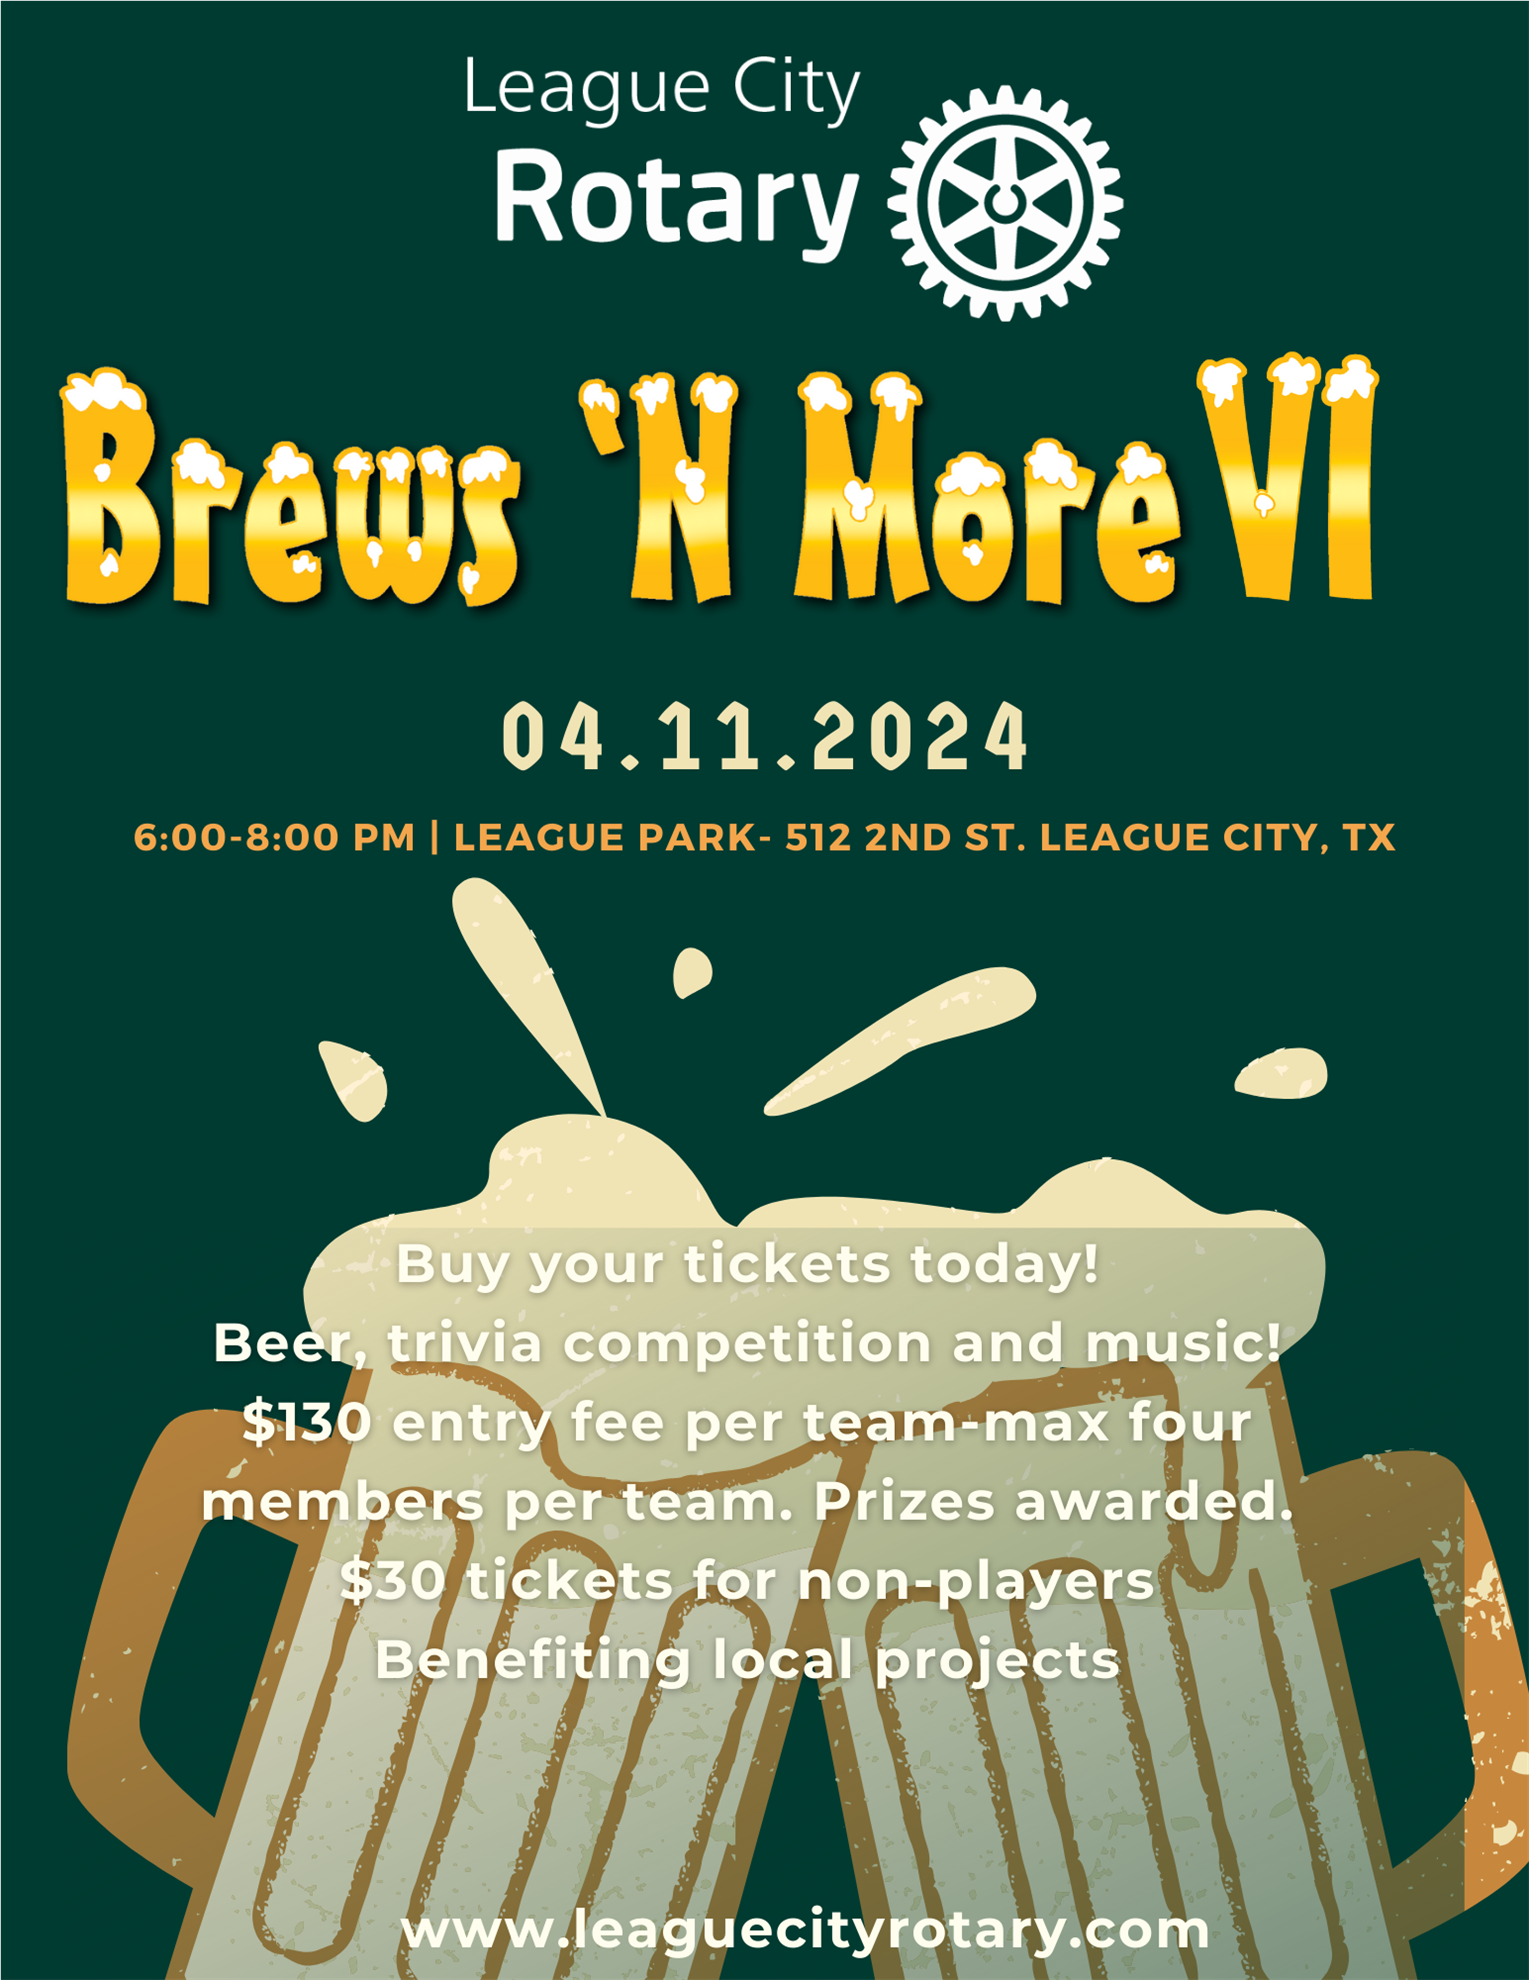 Click for Brews 'N More VI info - Rotary Club of League City TX